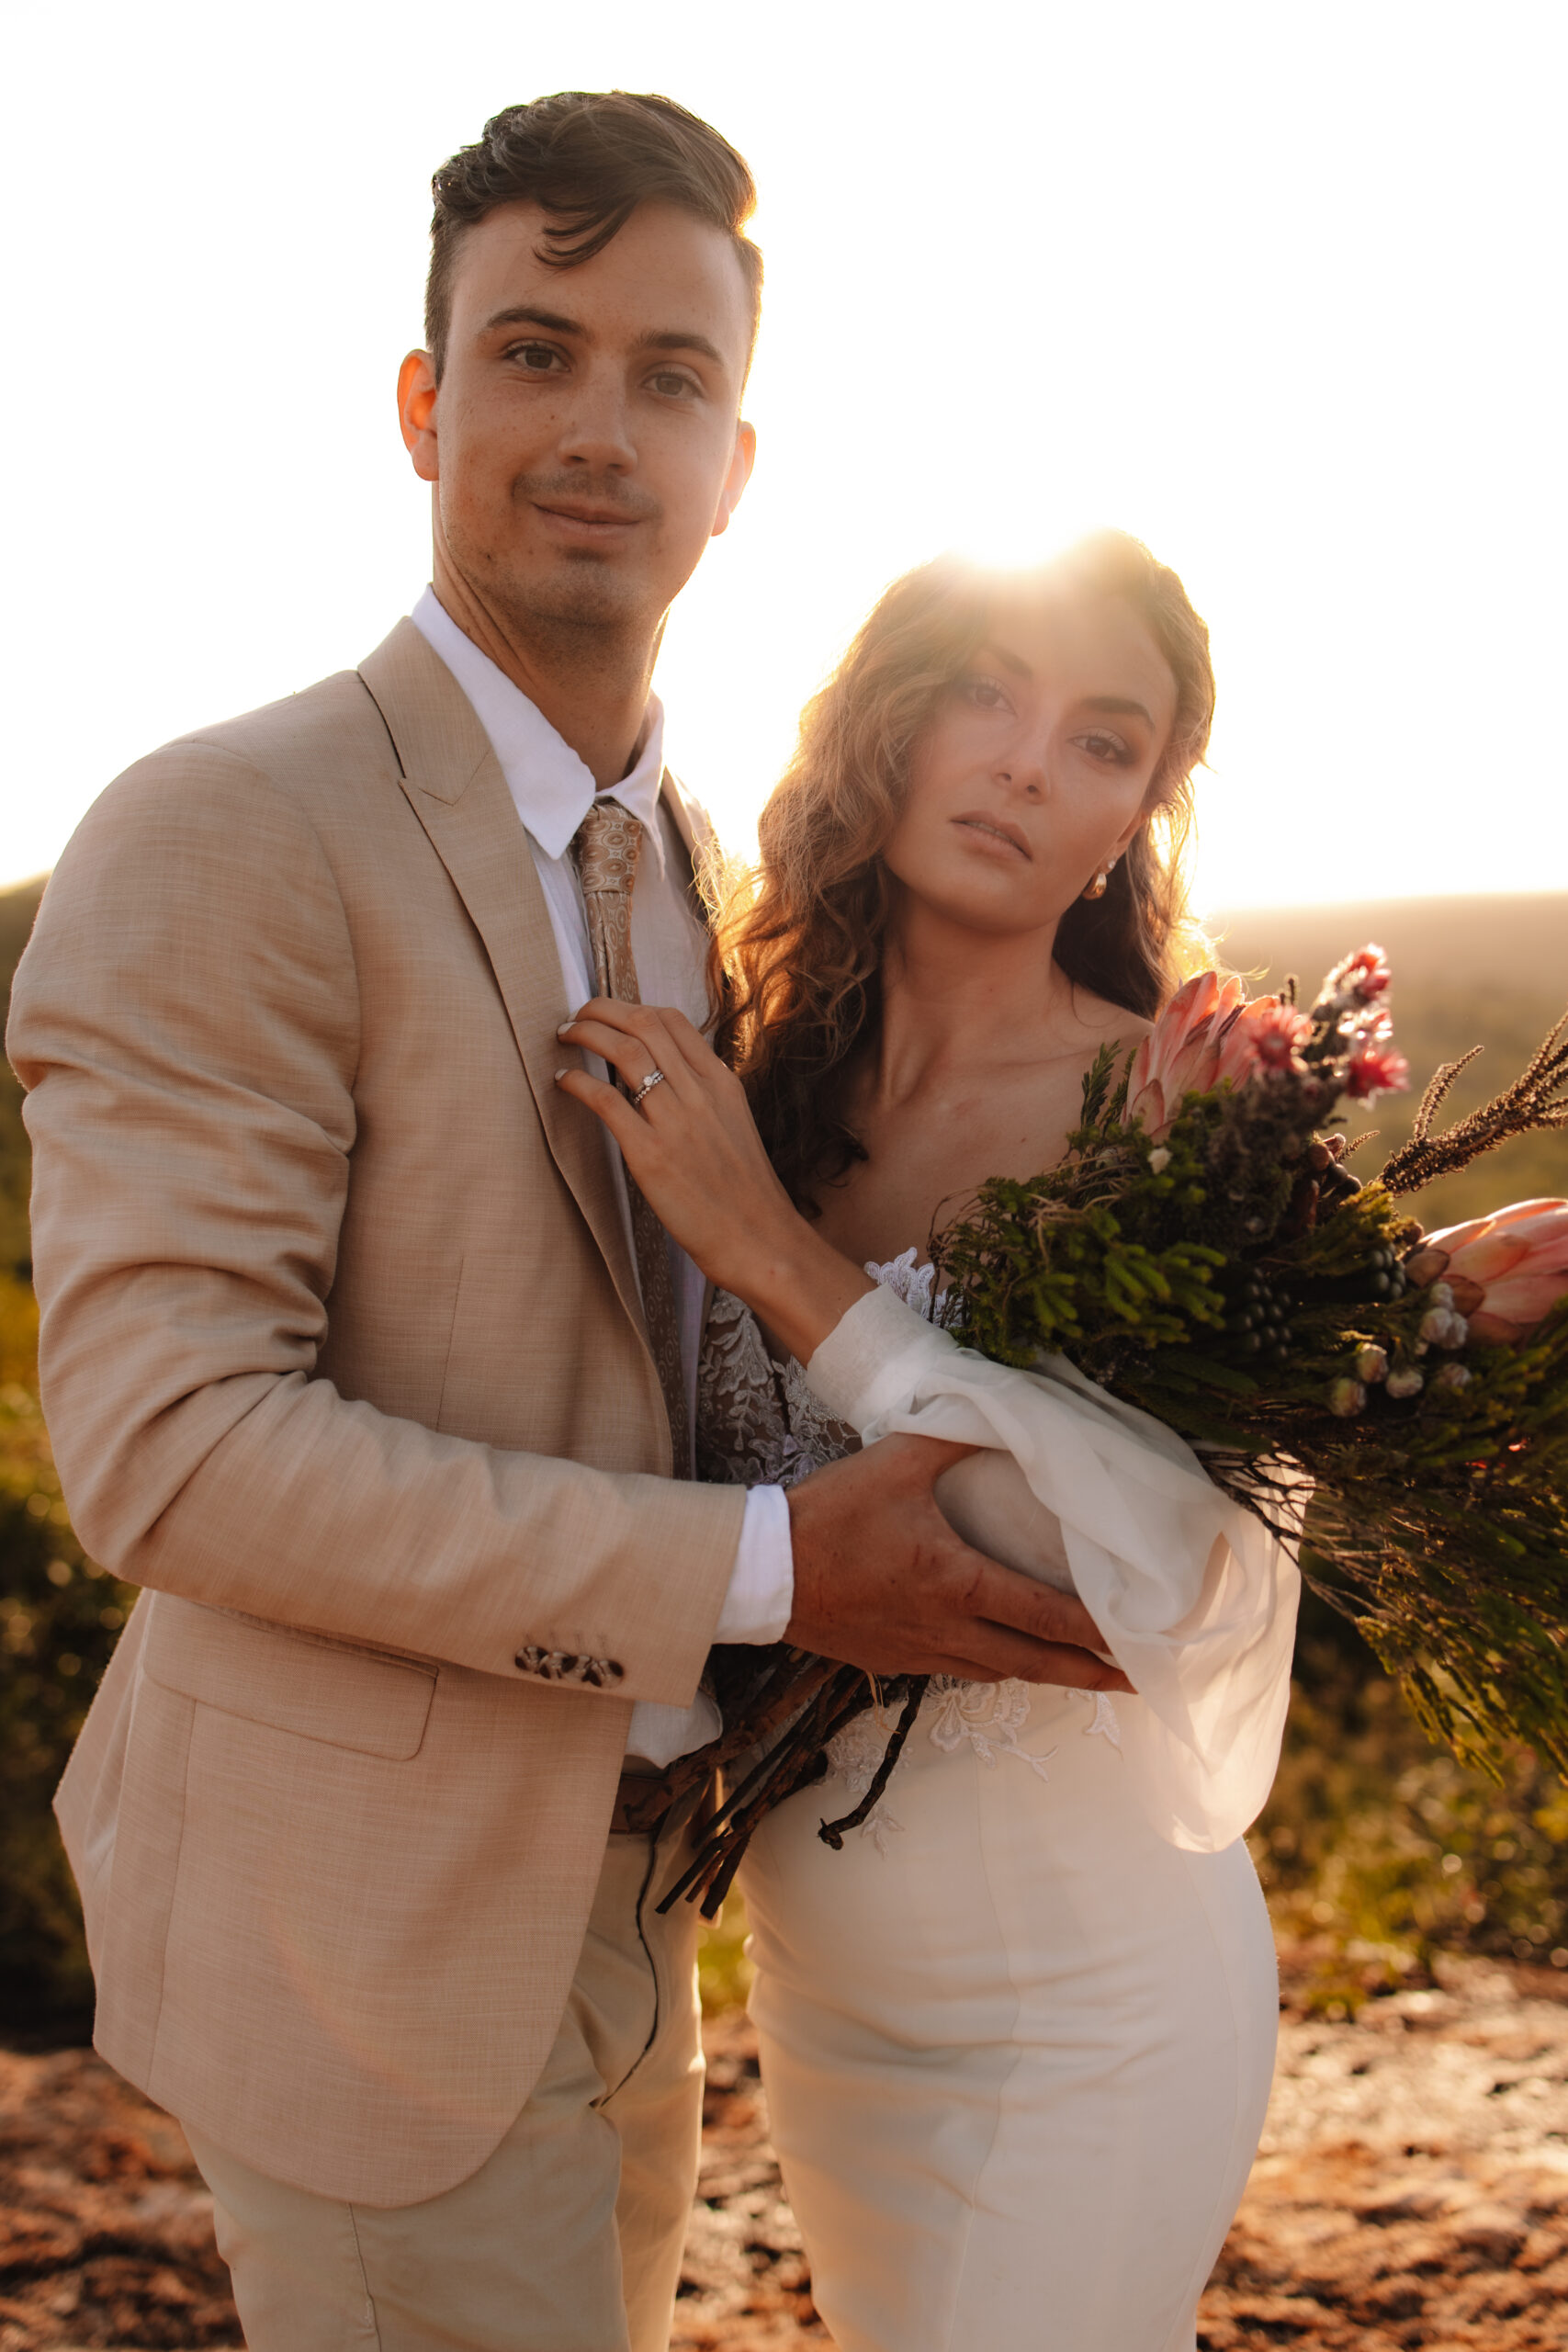 A couple embraces on a rocky ledge at sunset. The woman wears a white off-shoulder gown, and the man is in a beige suit. Forested hills extend into the distance in South Africa on their safari elopement